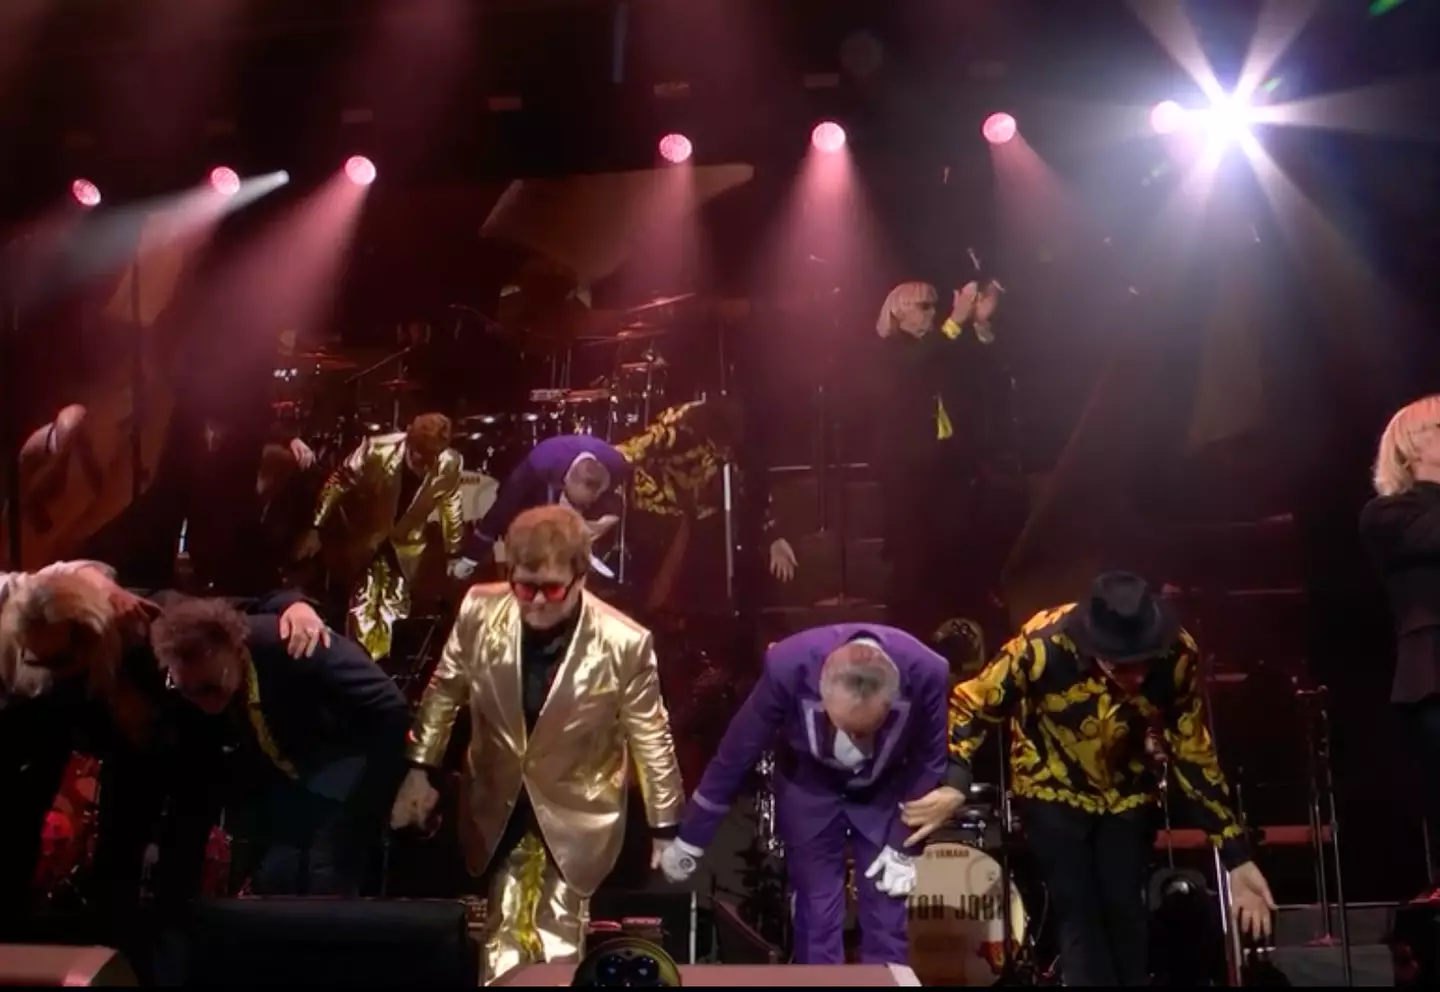 Elton John thanked the crowd as his gig came to an end.